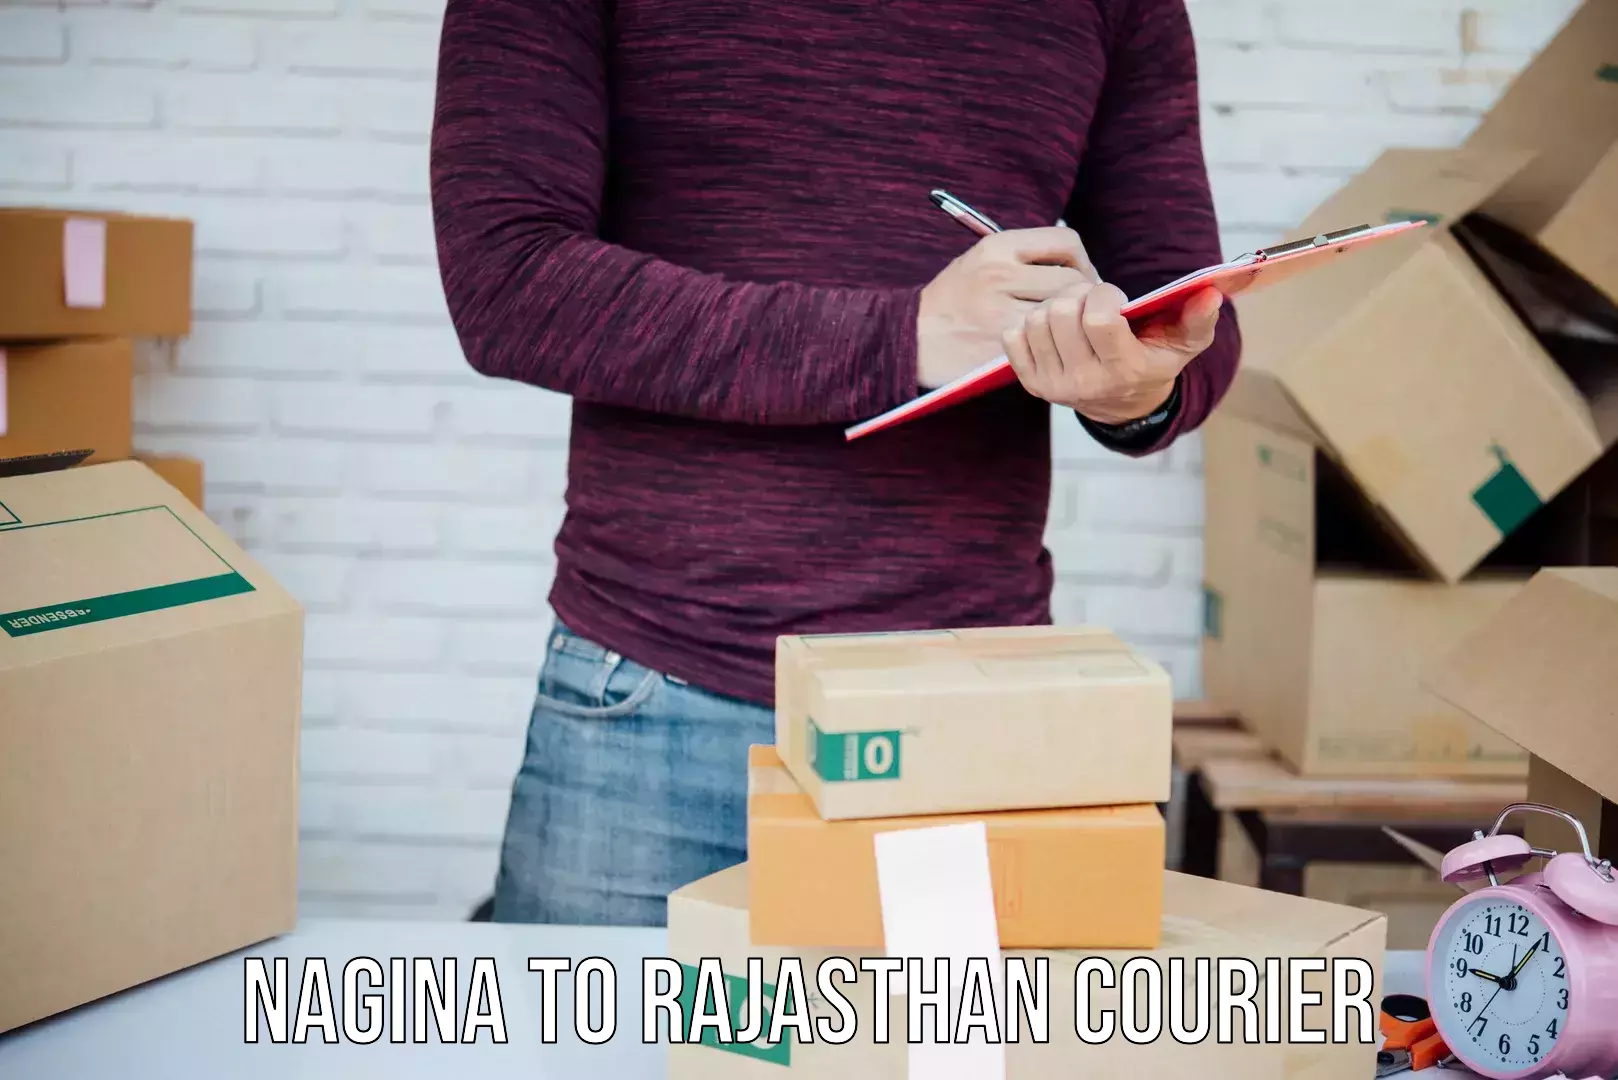 Courier service innovation Nagina to Rajasthan